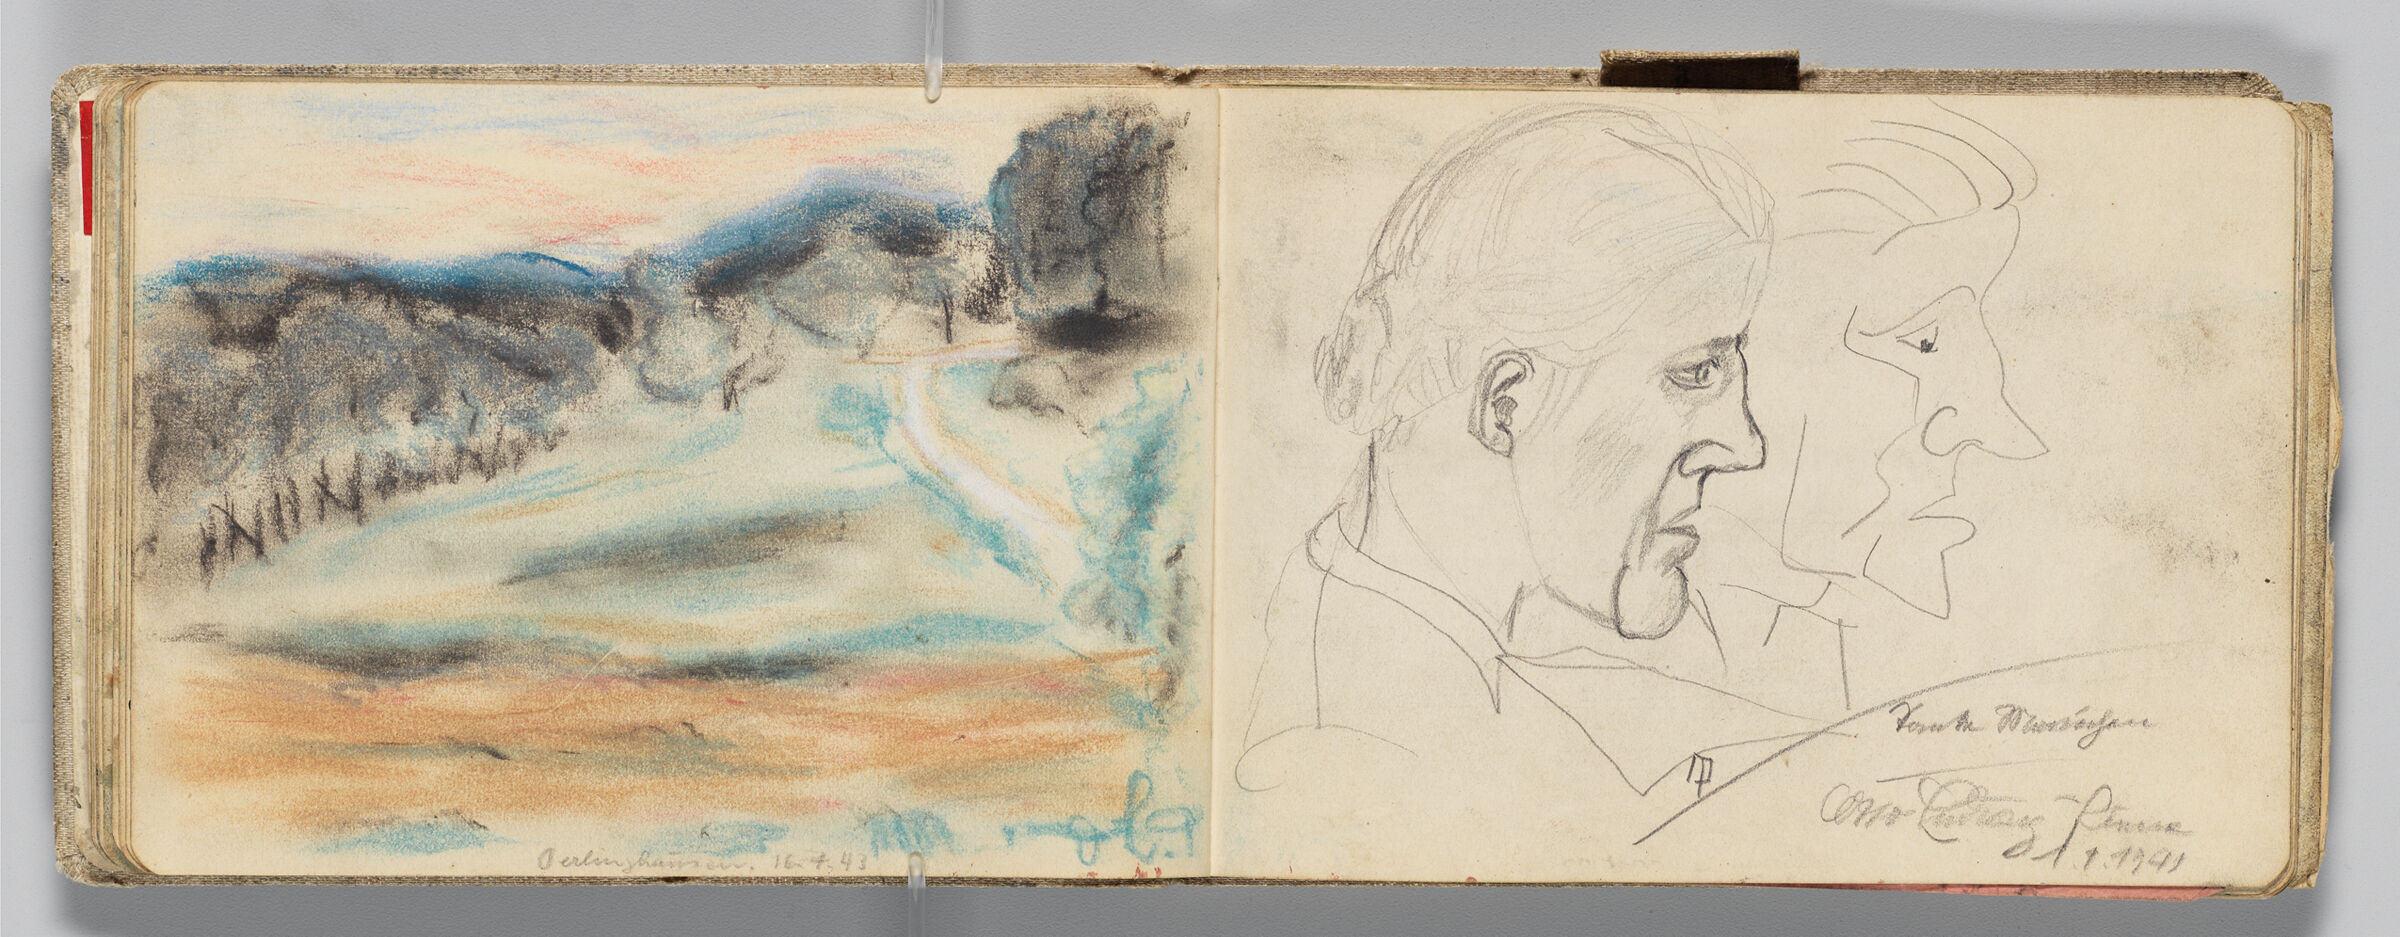 Untitled (Landscape, Left Page); Untitled (Two Sketches Of Figure In Profile, Right Page)